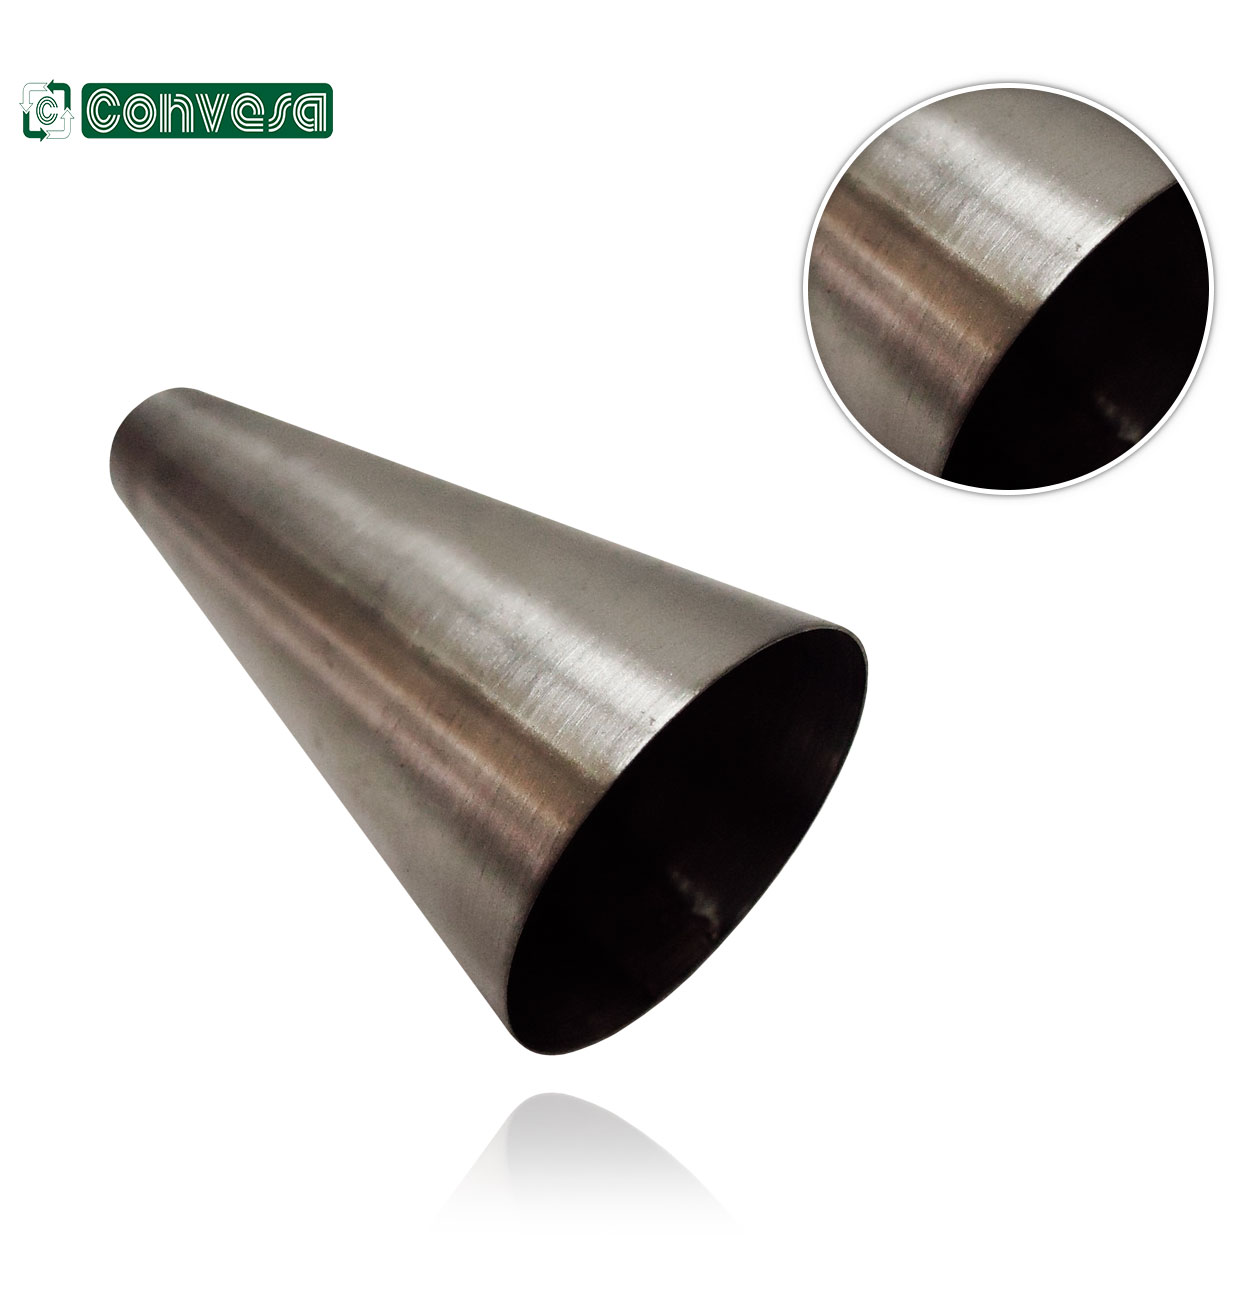 125 diameter STAINLESS STEEL TOP OUTLET CONE